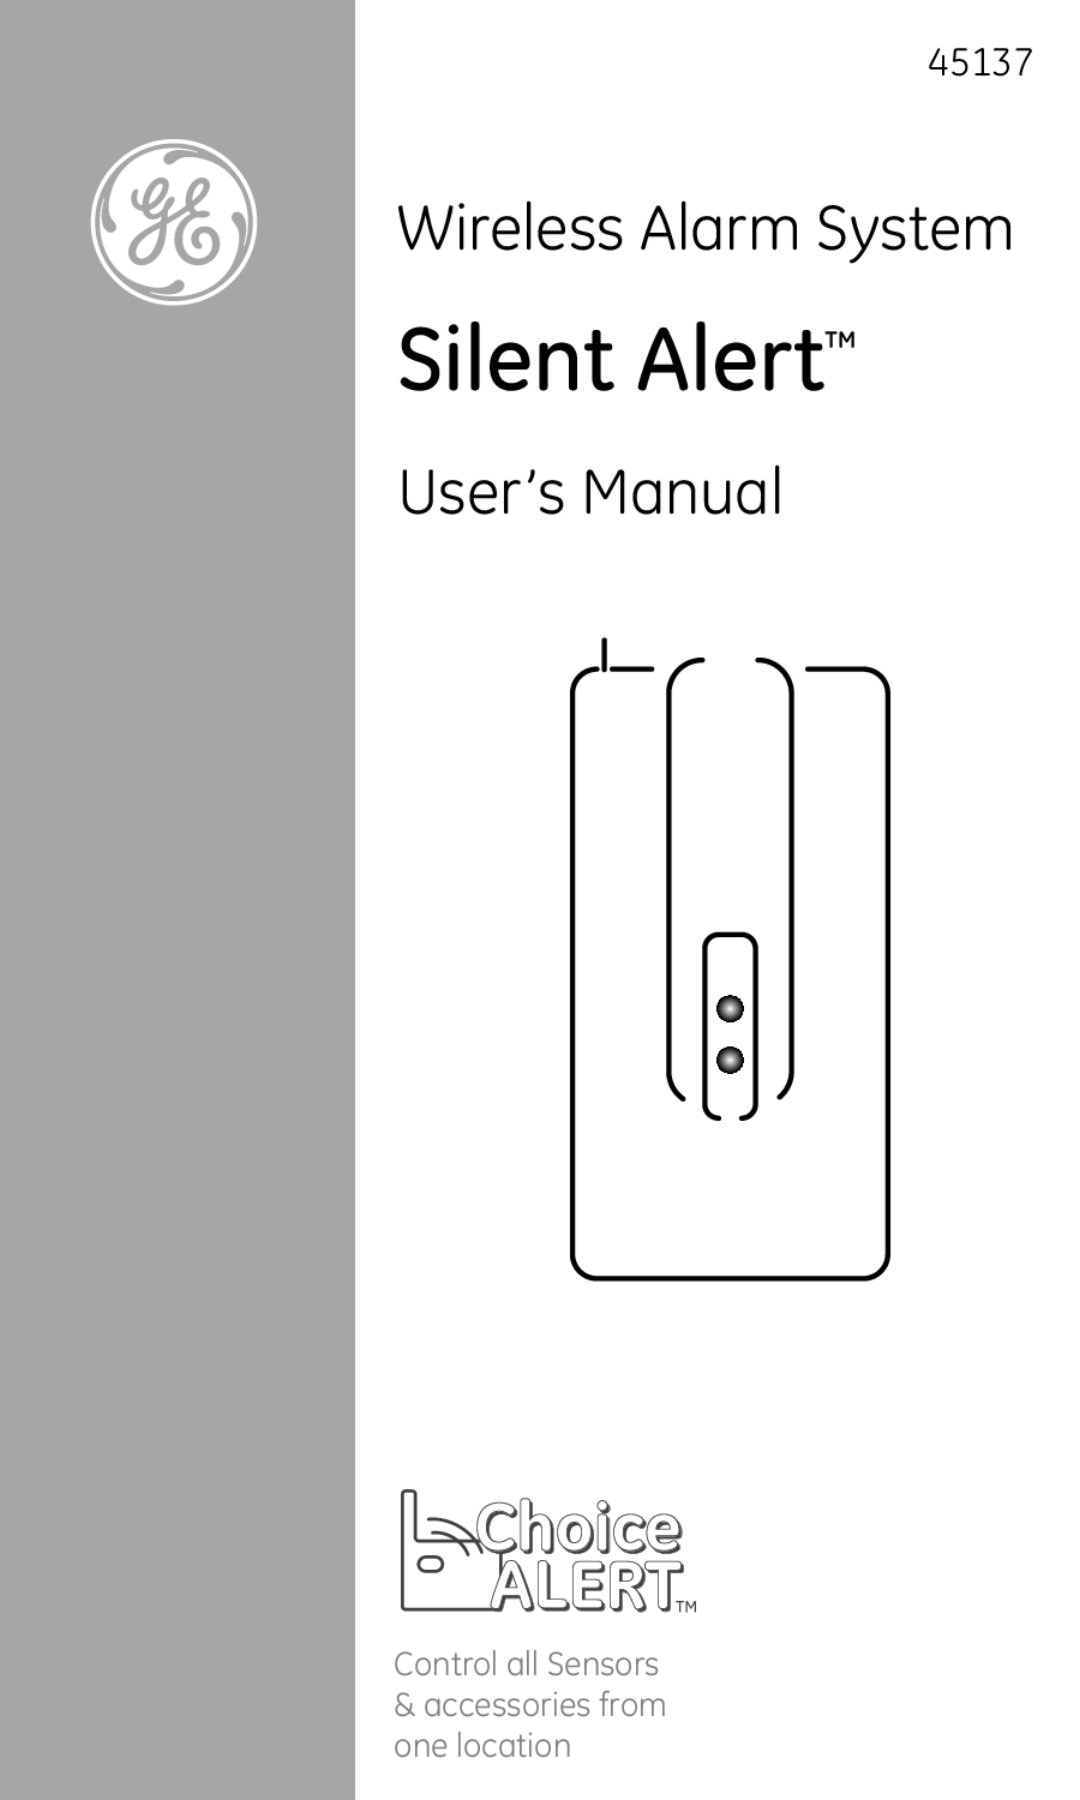 GE 45137 user manual Silent Alert, Choice ALERT, Wireless Alarm System, Control all Sensors, accessories from one location 